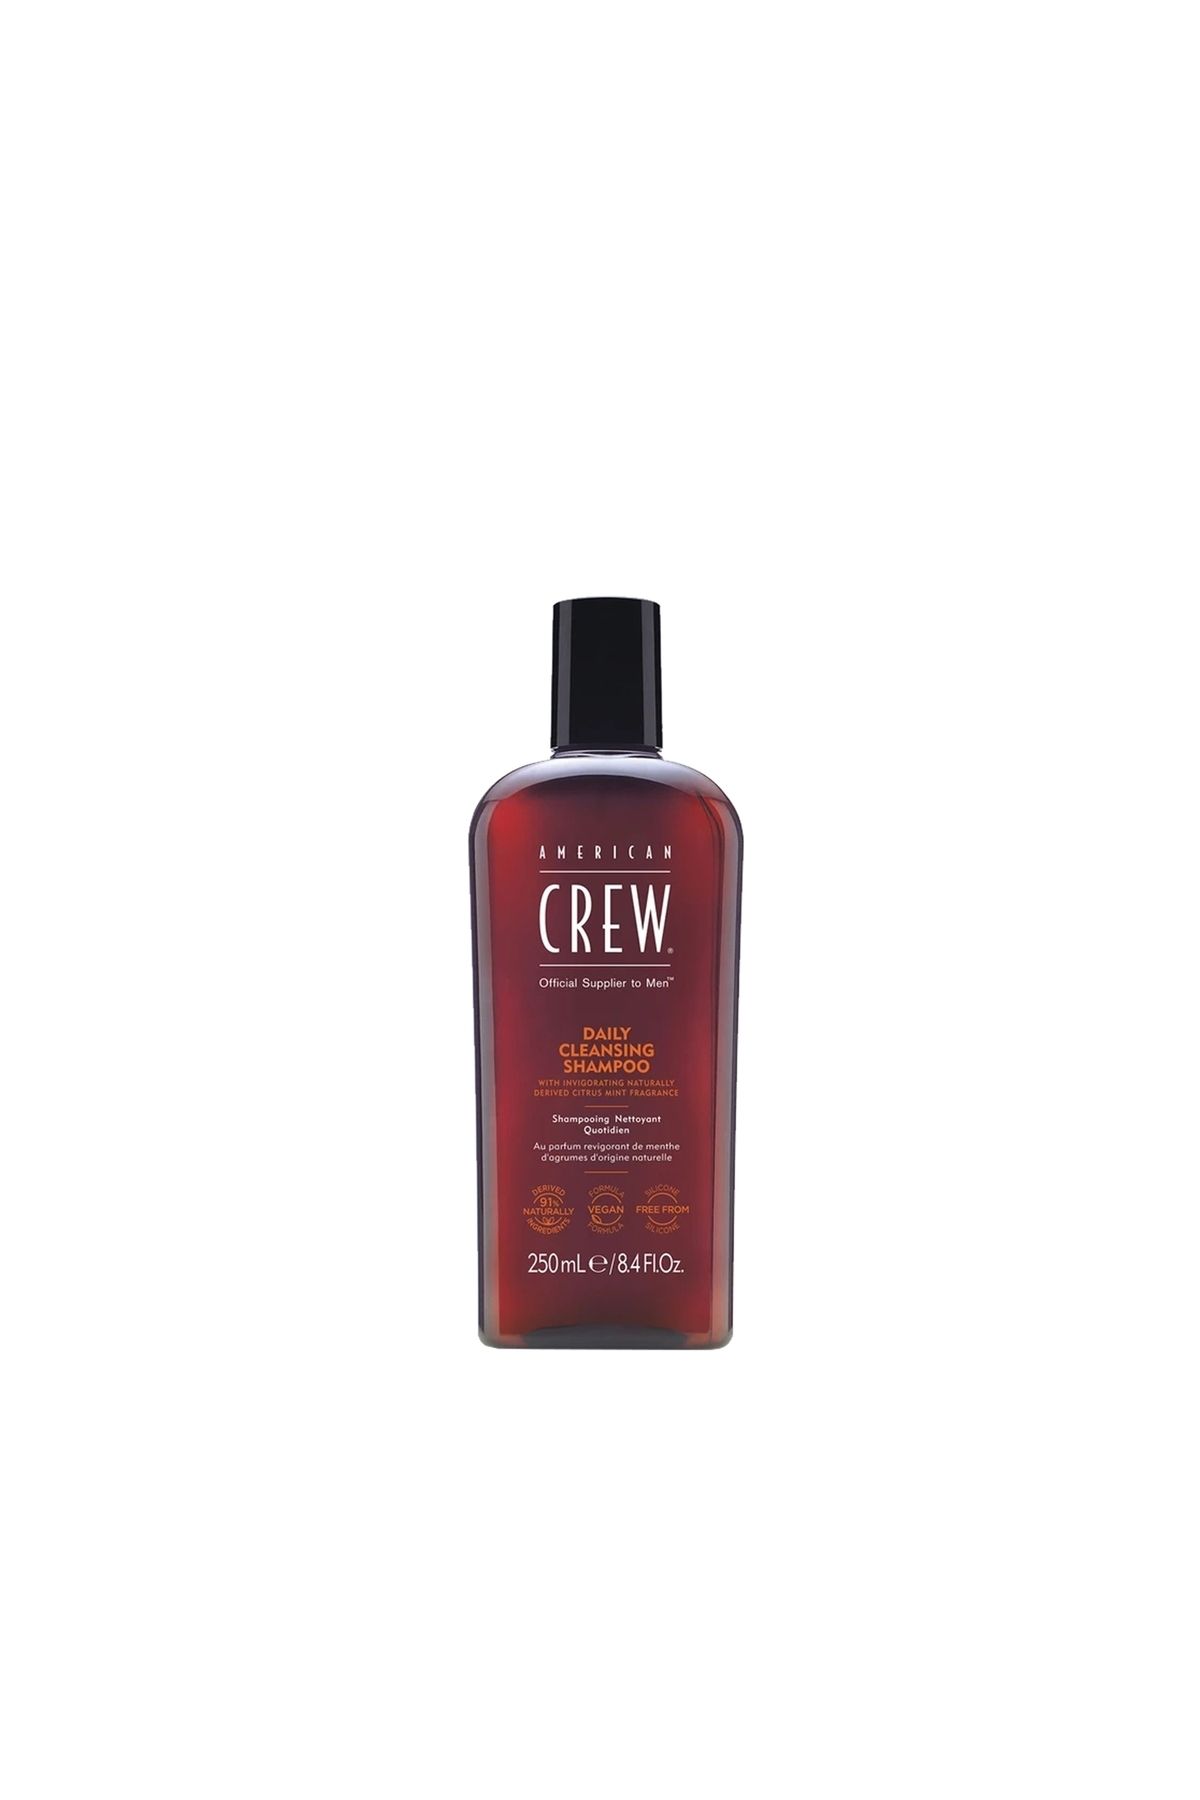 American Crew DAİLY CLEANSİNG DAİLY CLEANSİNG SHAMPOO 250 ML DKHAİR250